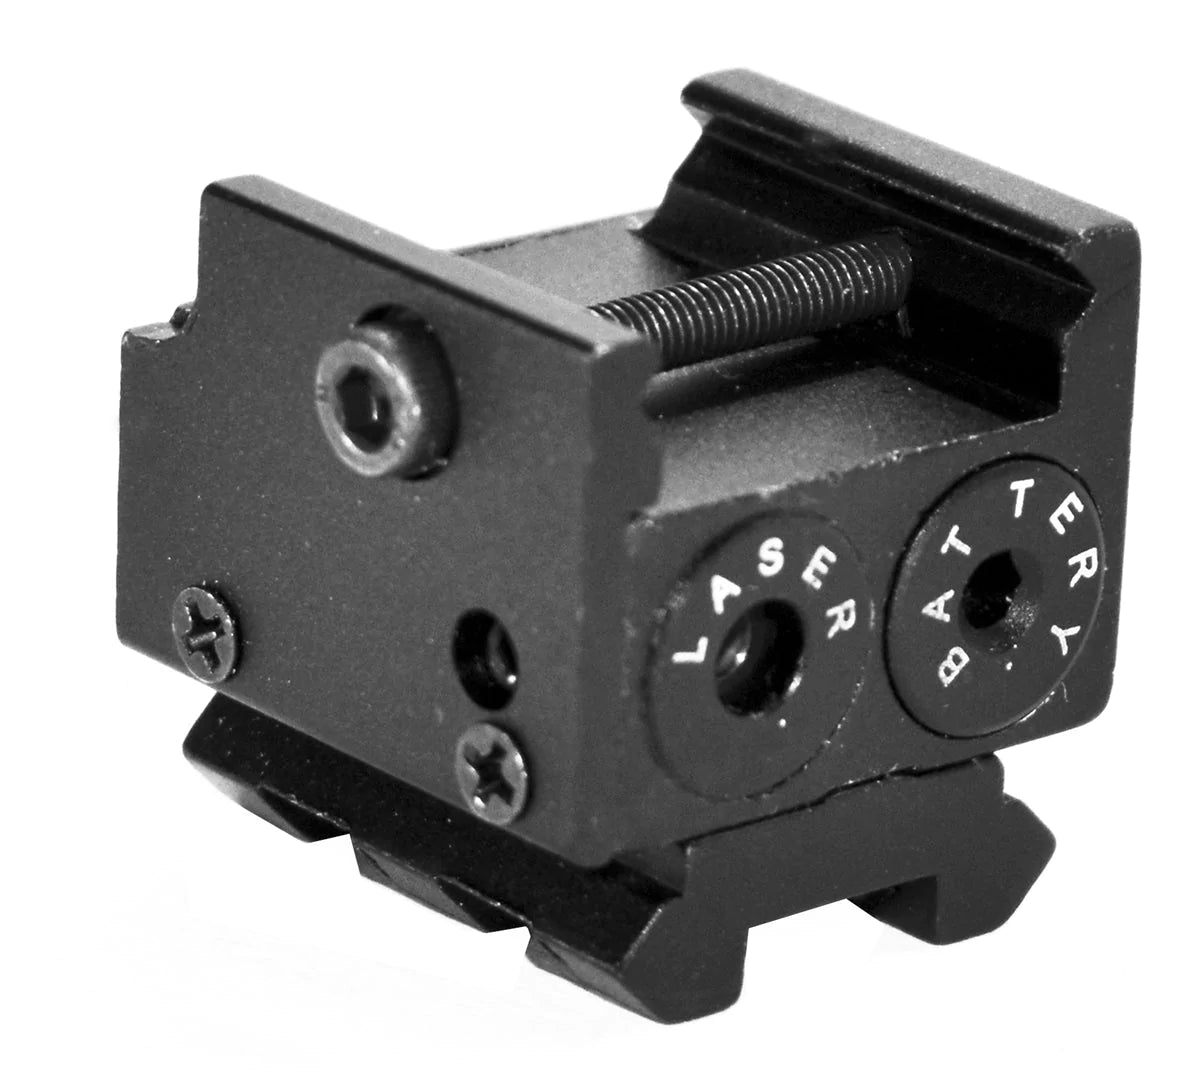 picatinny mounted red laser for handguns.